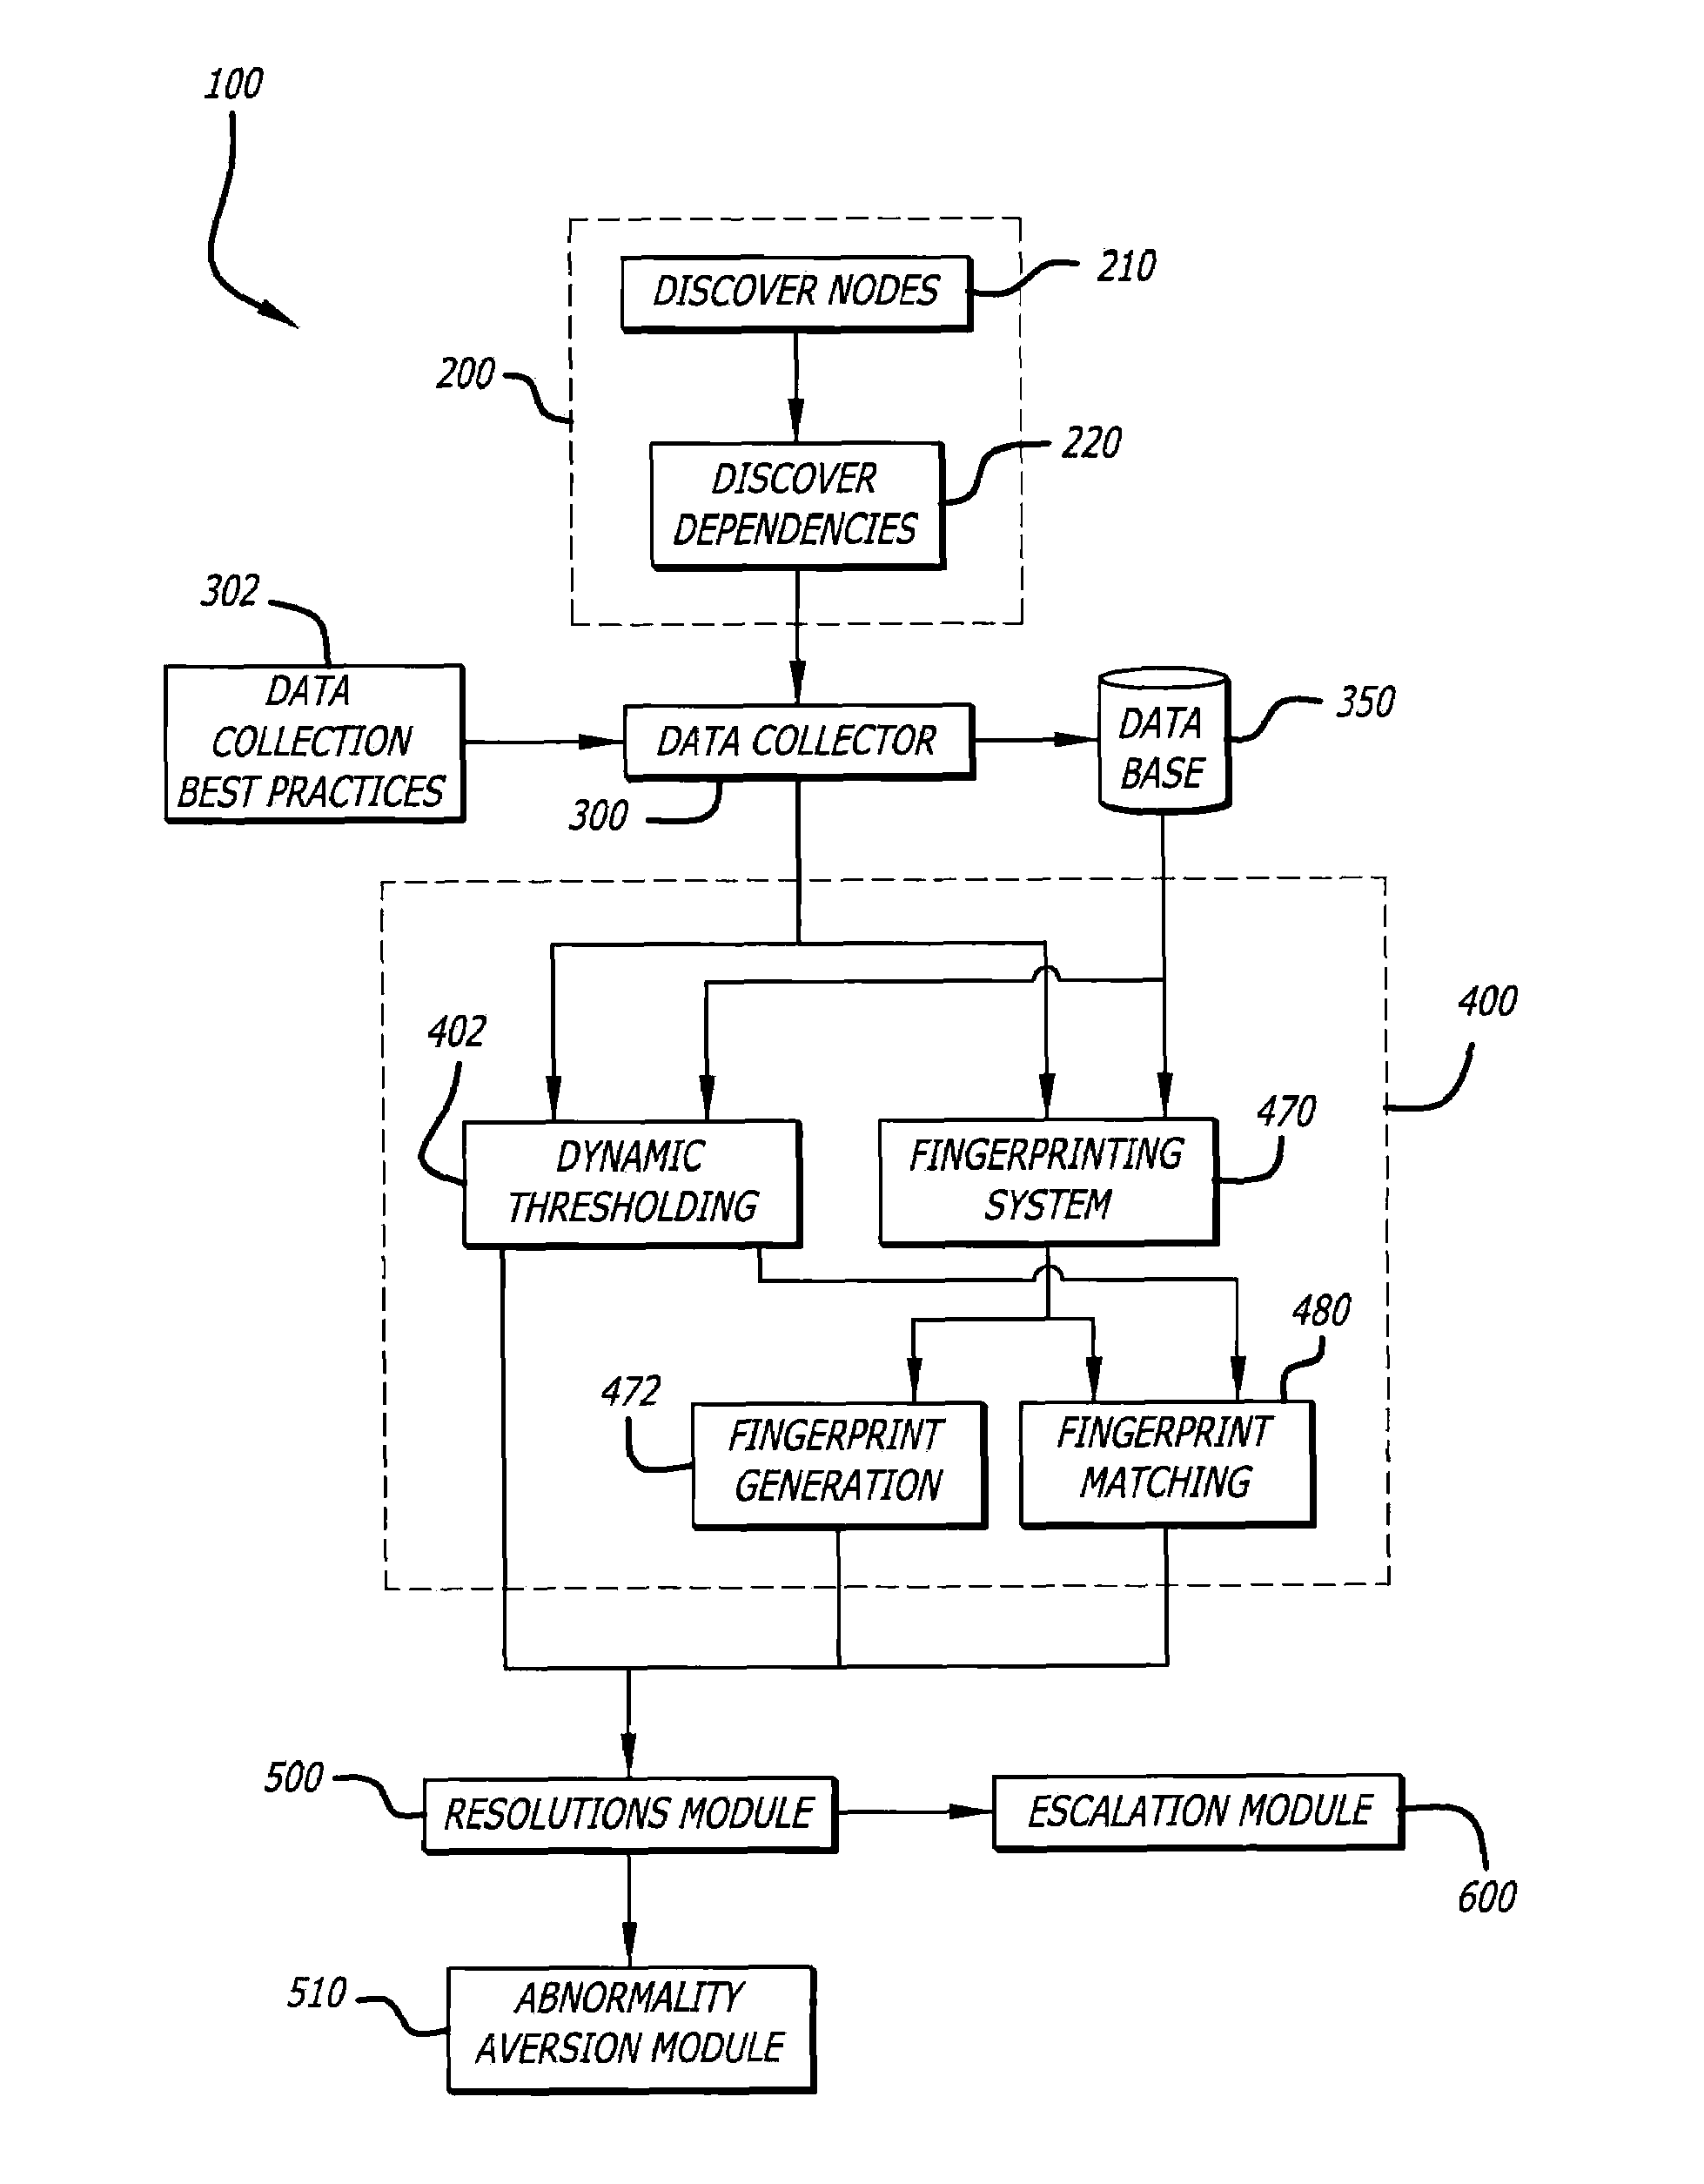 Self-learning integrity management system and related methods